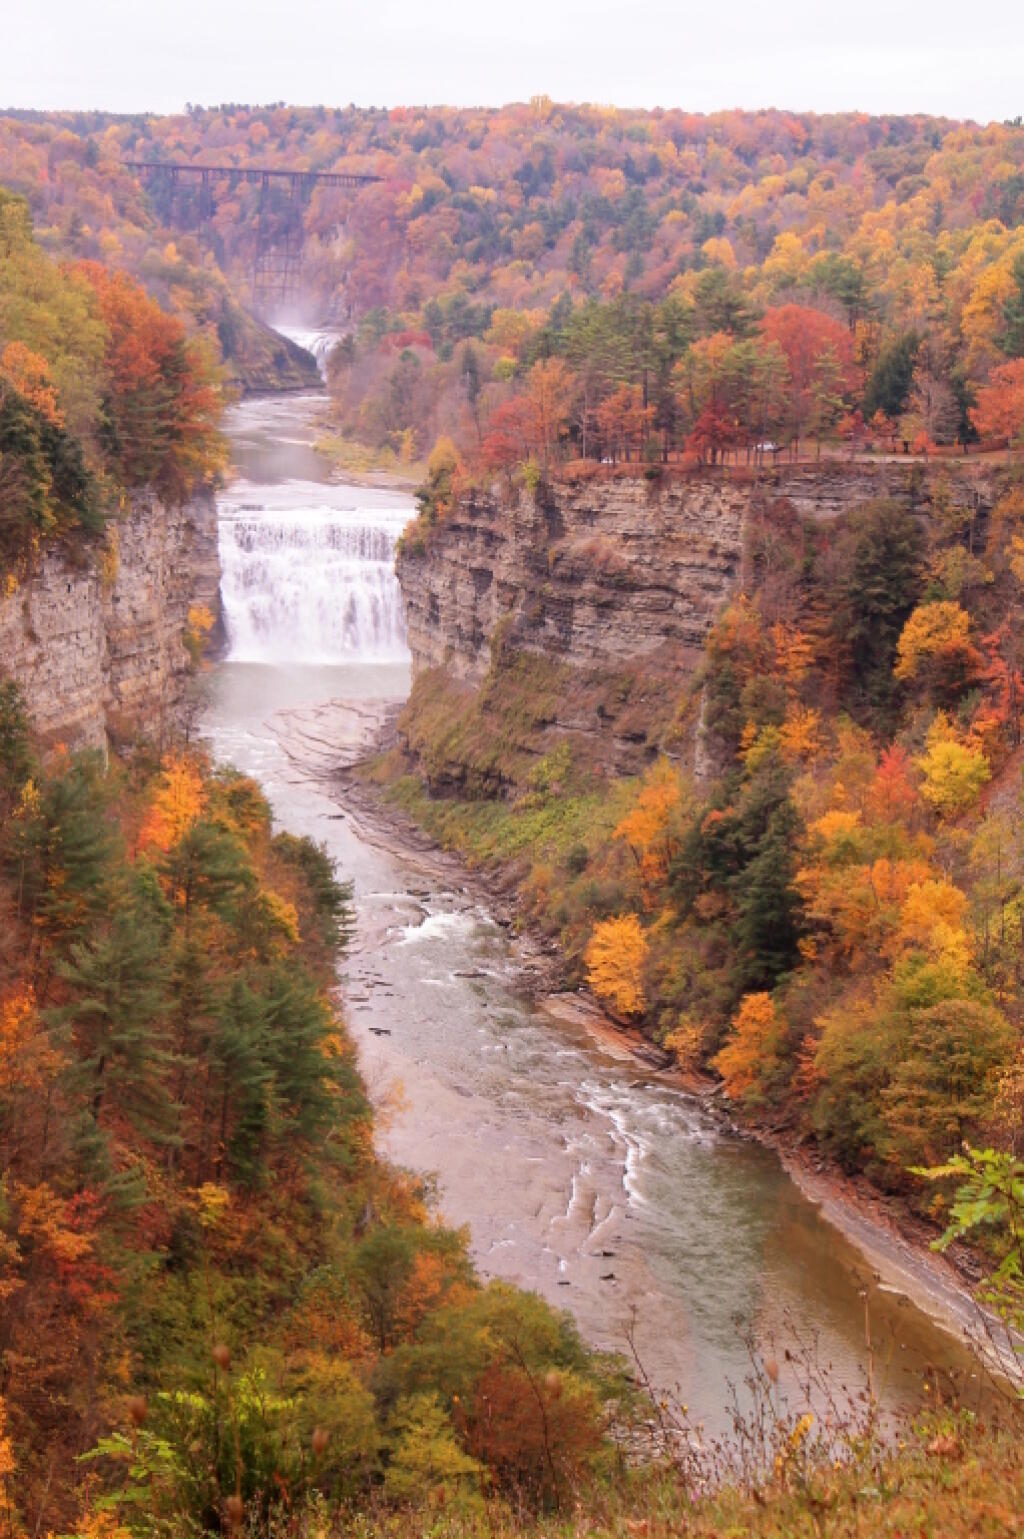  View of the Old Letchworth Bridge